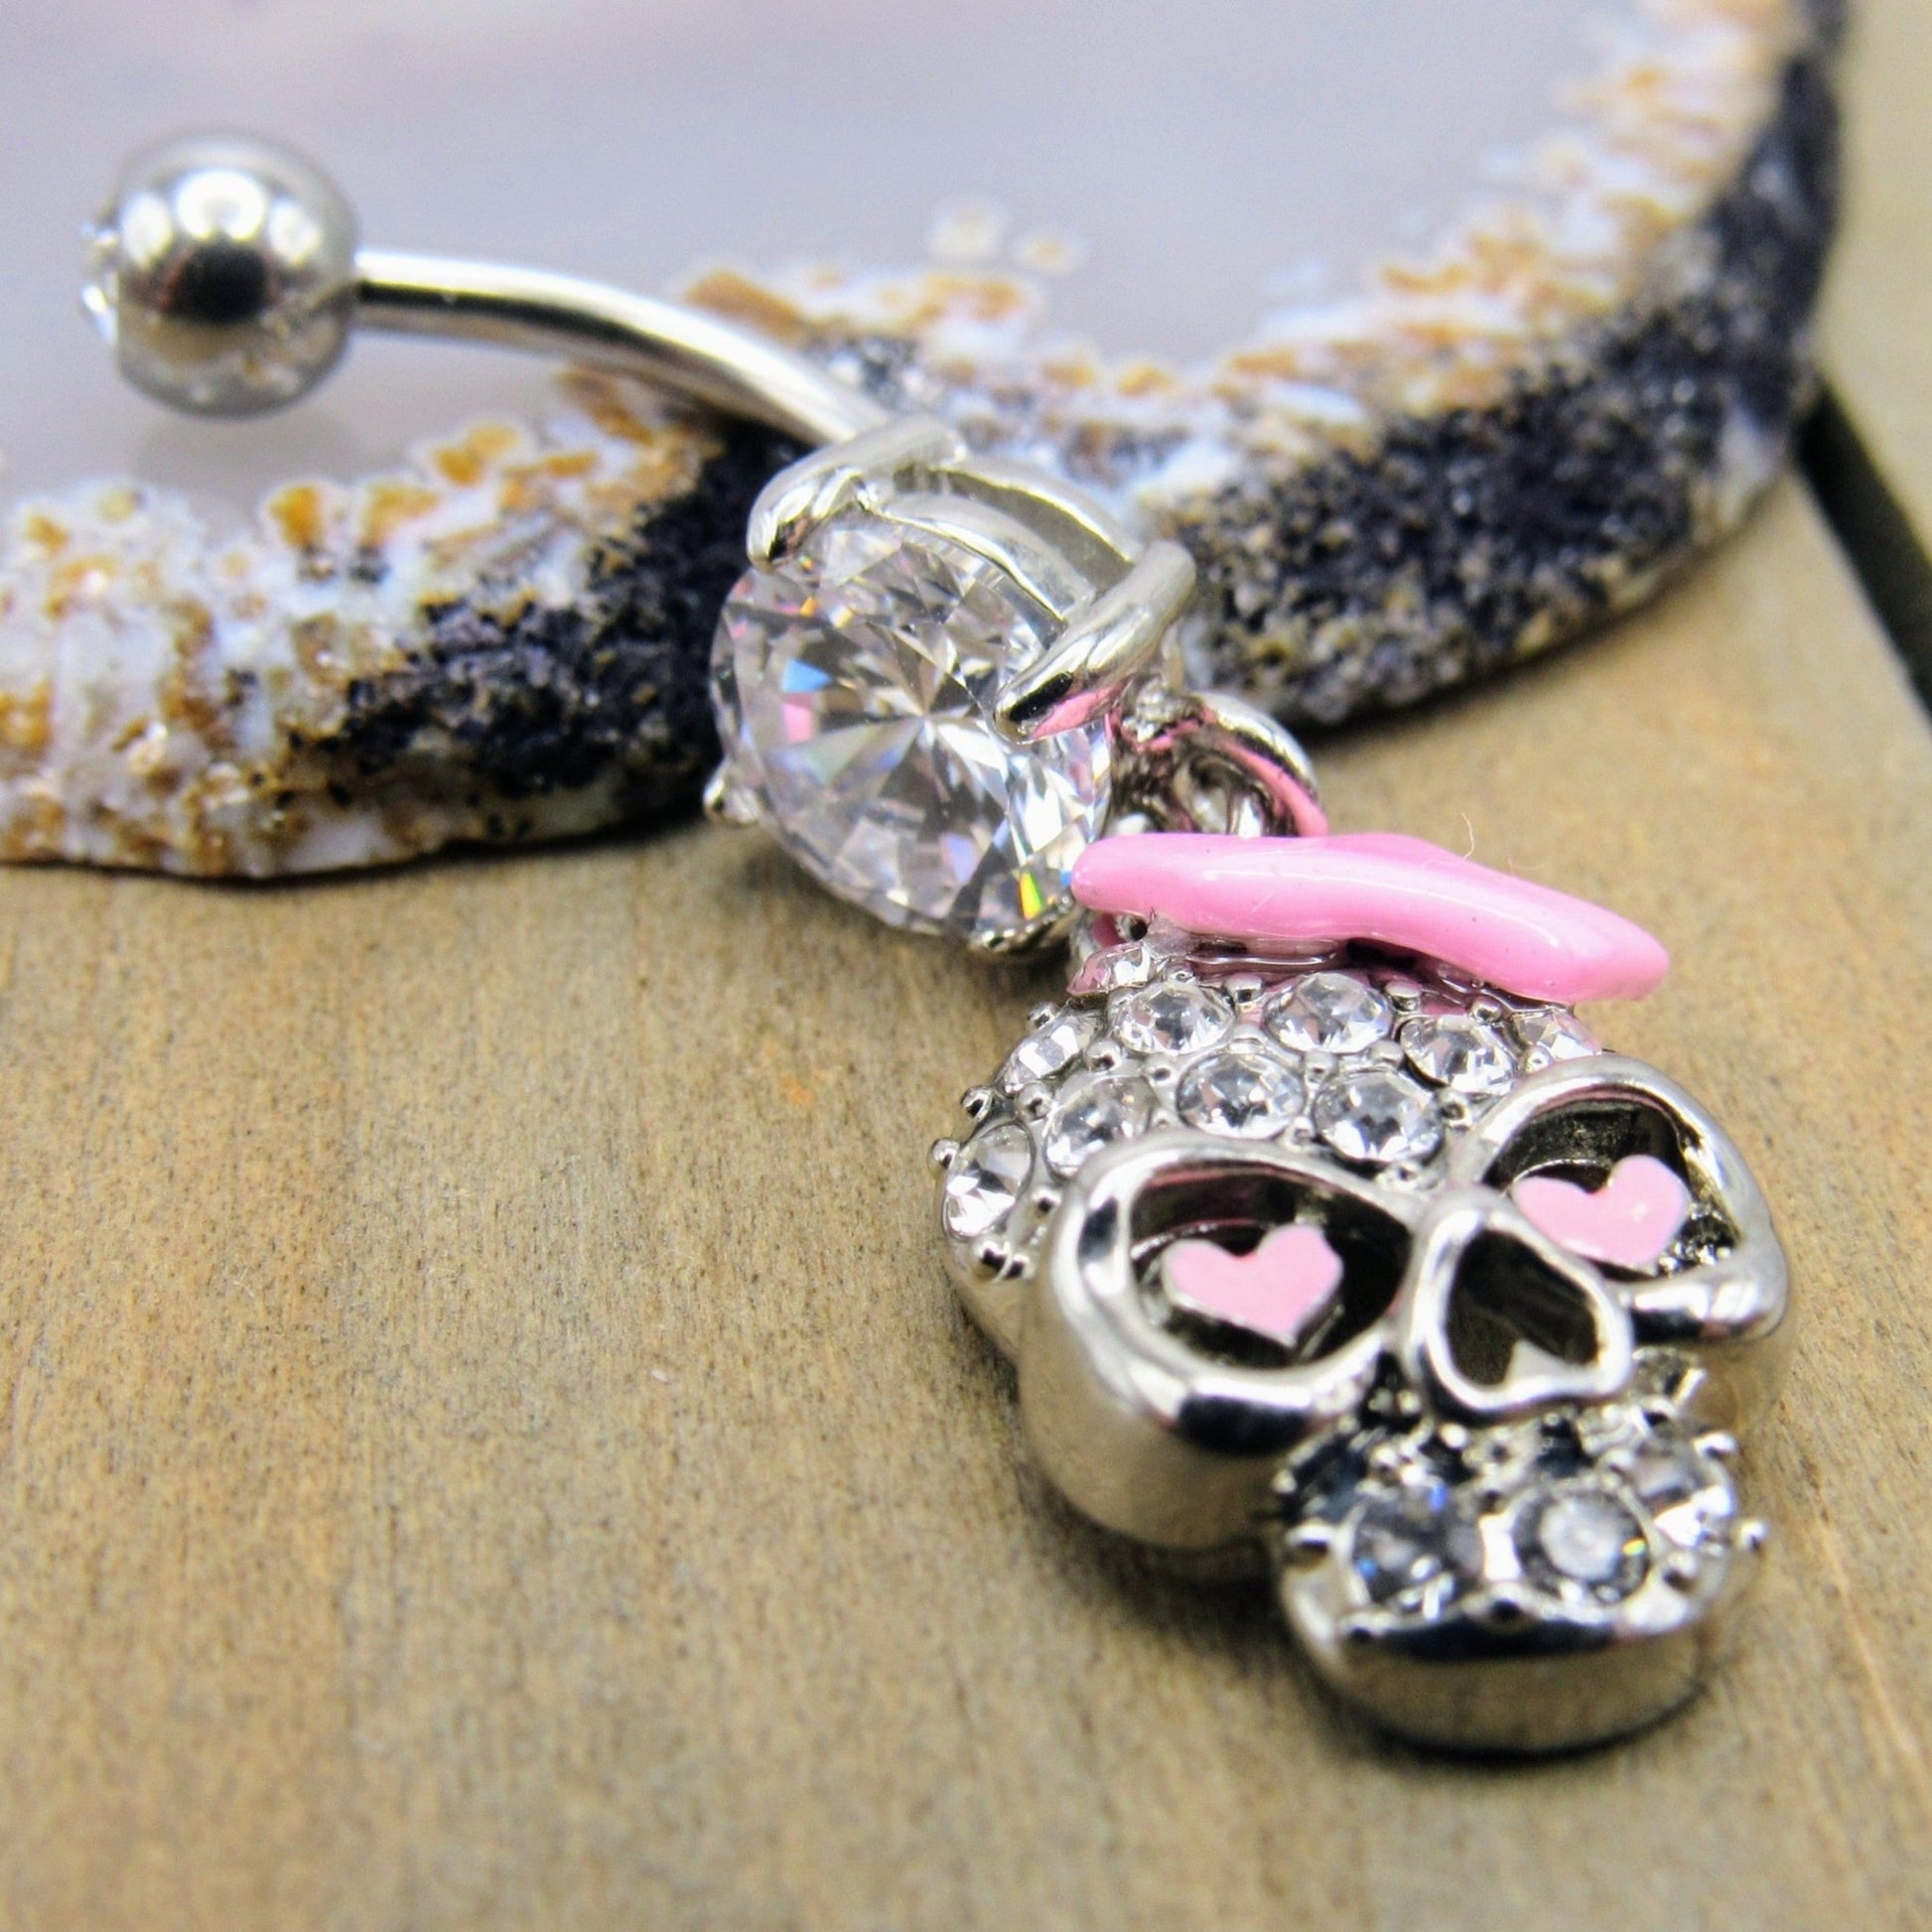 14g Skull belly button piercing ring 7/16" crystal clear gemstones pink bow heart dangle design - Siren Body Jewelry